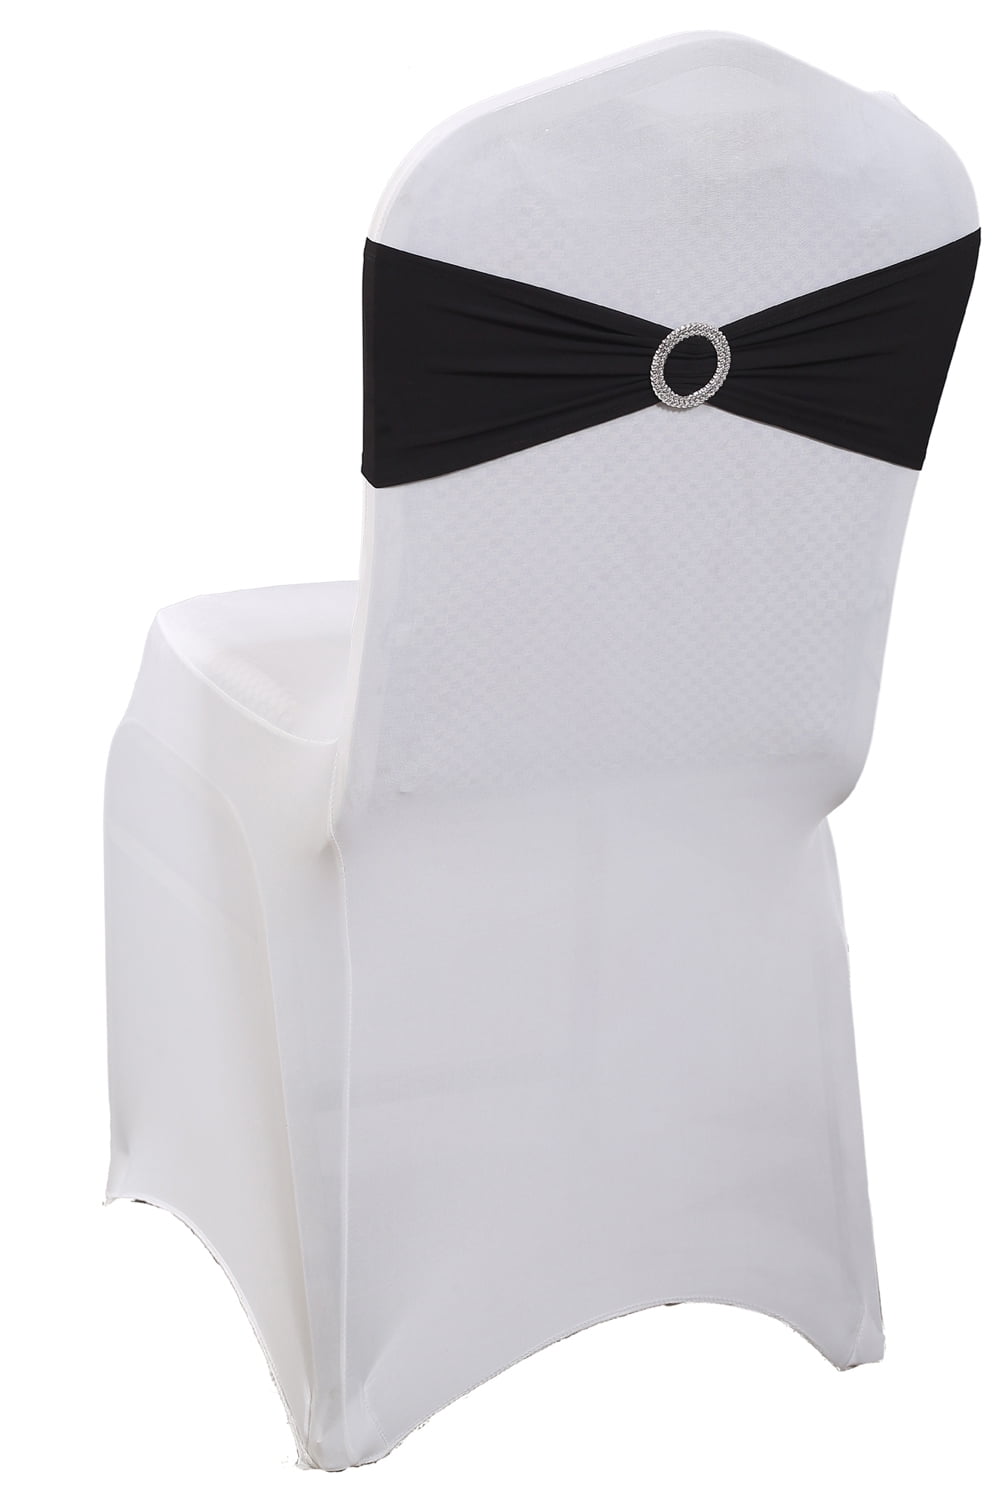 Details about   10 Black Spandex STRETCHABLE CHAIR SASHES Wedding Party Decorations SALE 